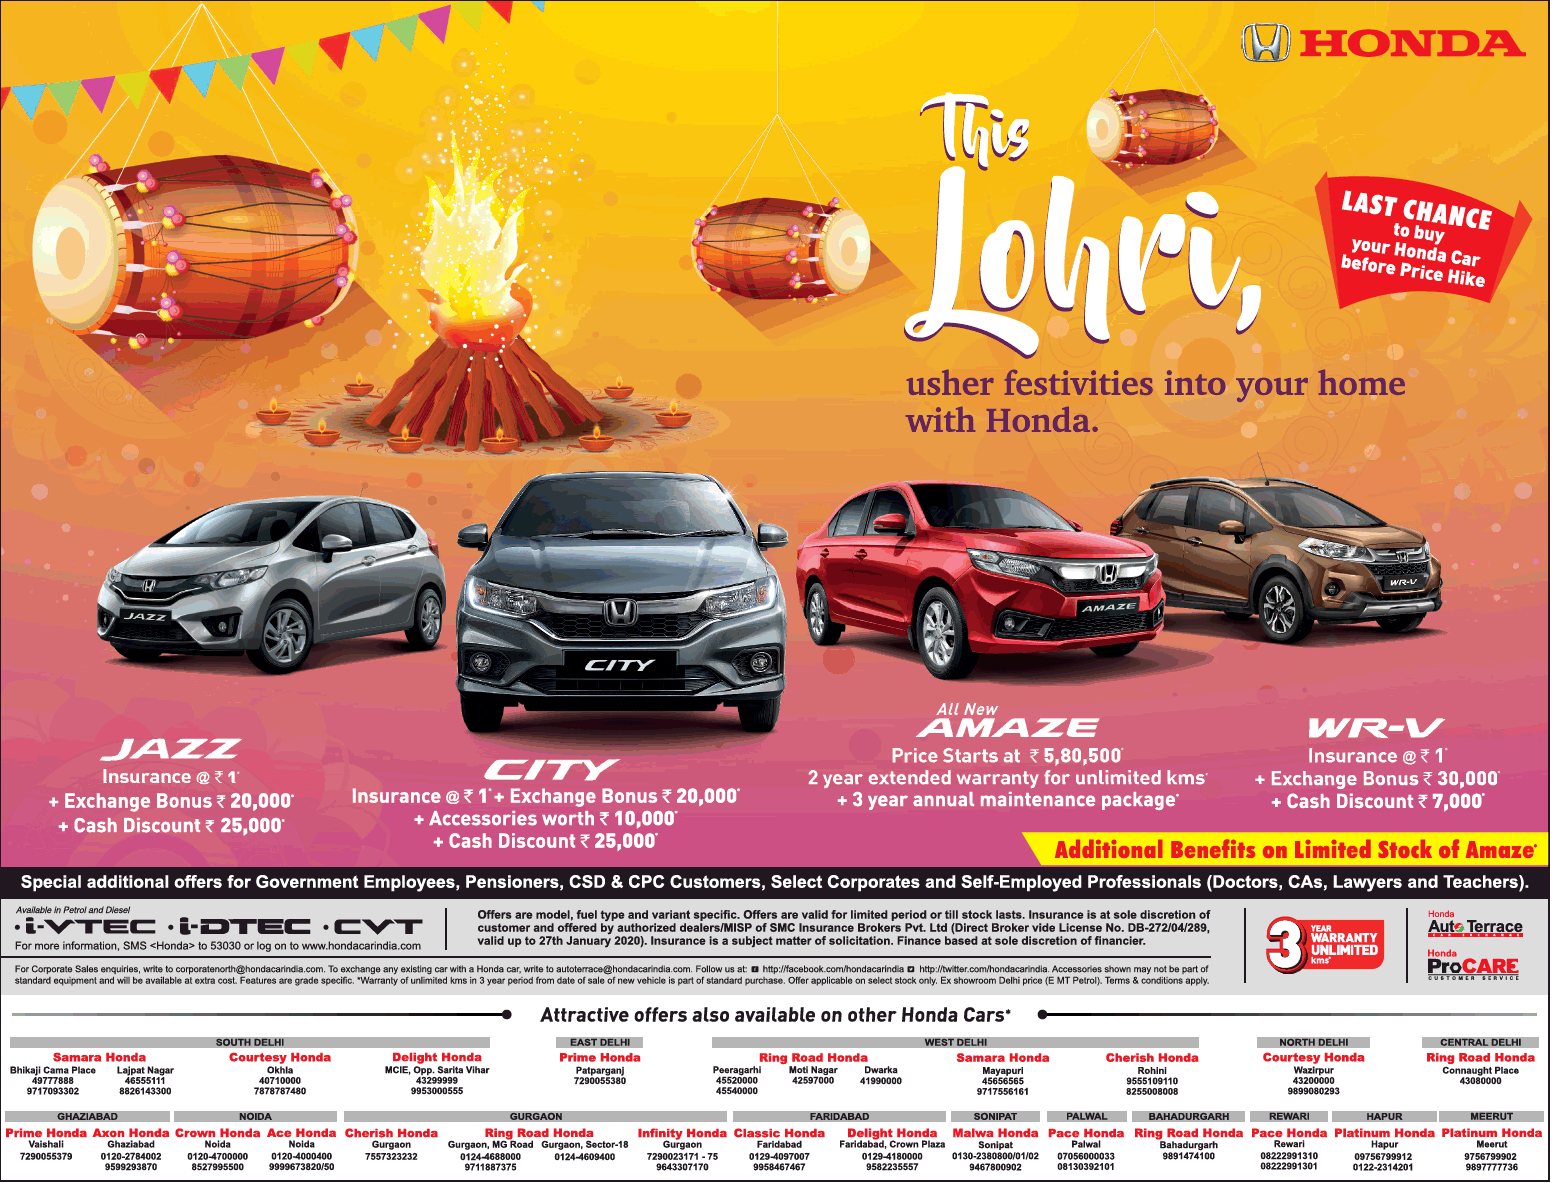 honda-the-lohri-usher-festivities-into-your-home-with-honda-ad-delhi-times-12-01-2019.png